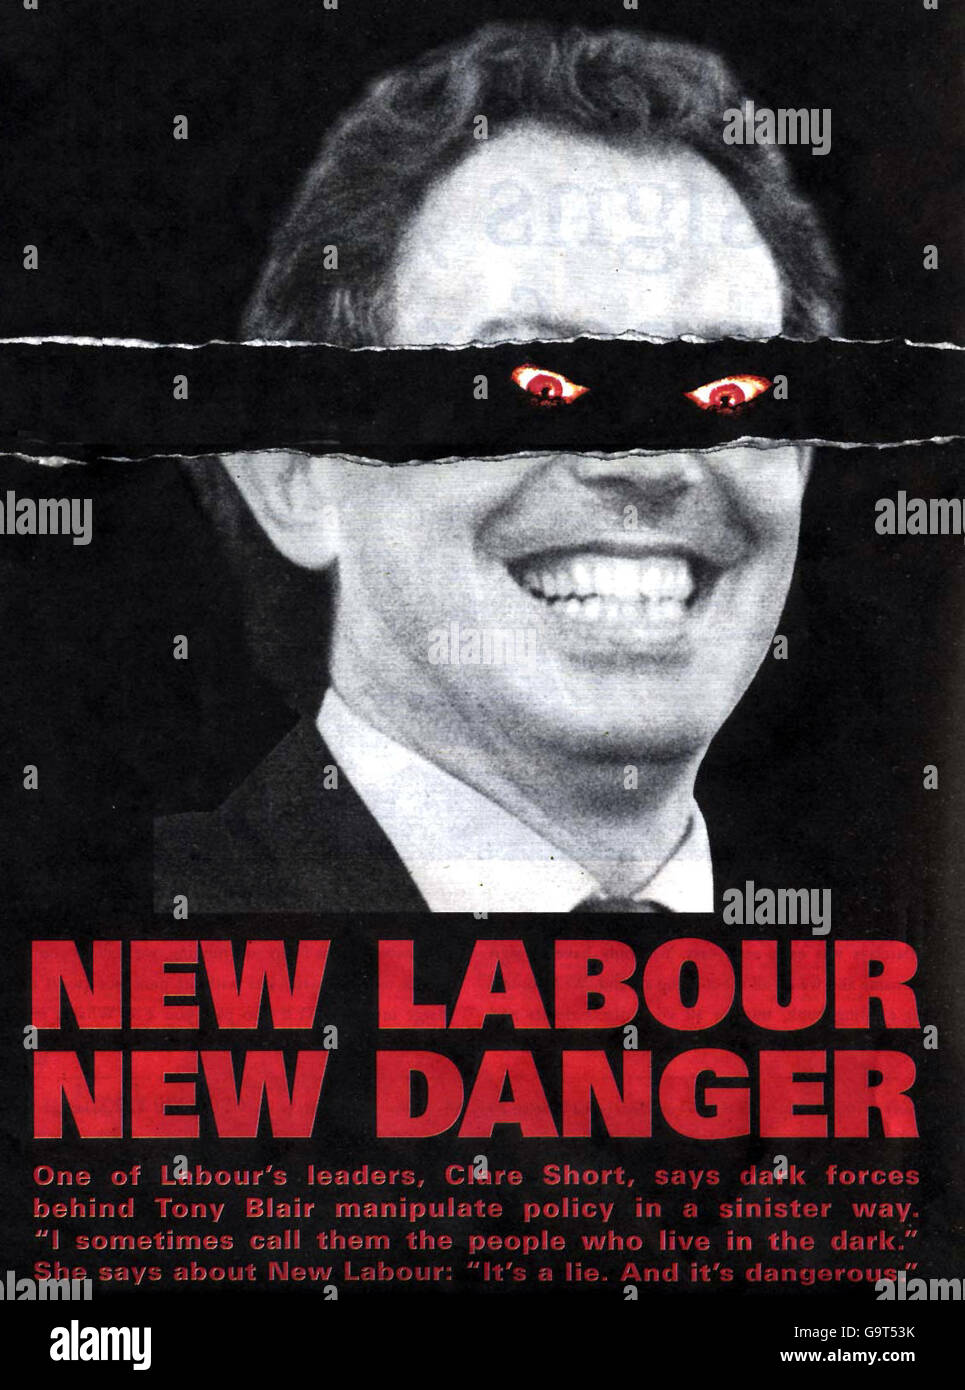 The Conservative Central Office unveiled their latest pre-election campaign weapon, a poster depicting Tony Blair with demonic eyes. Stock Photo